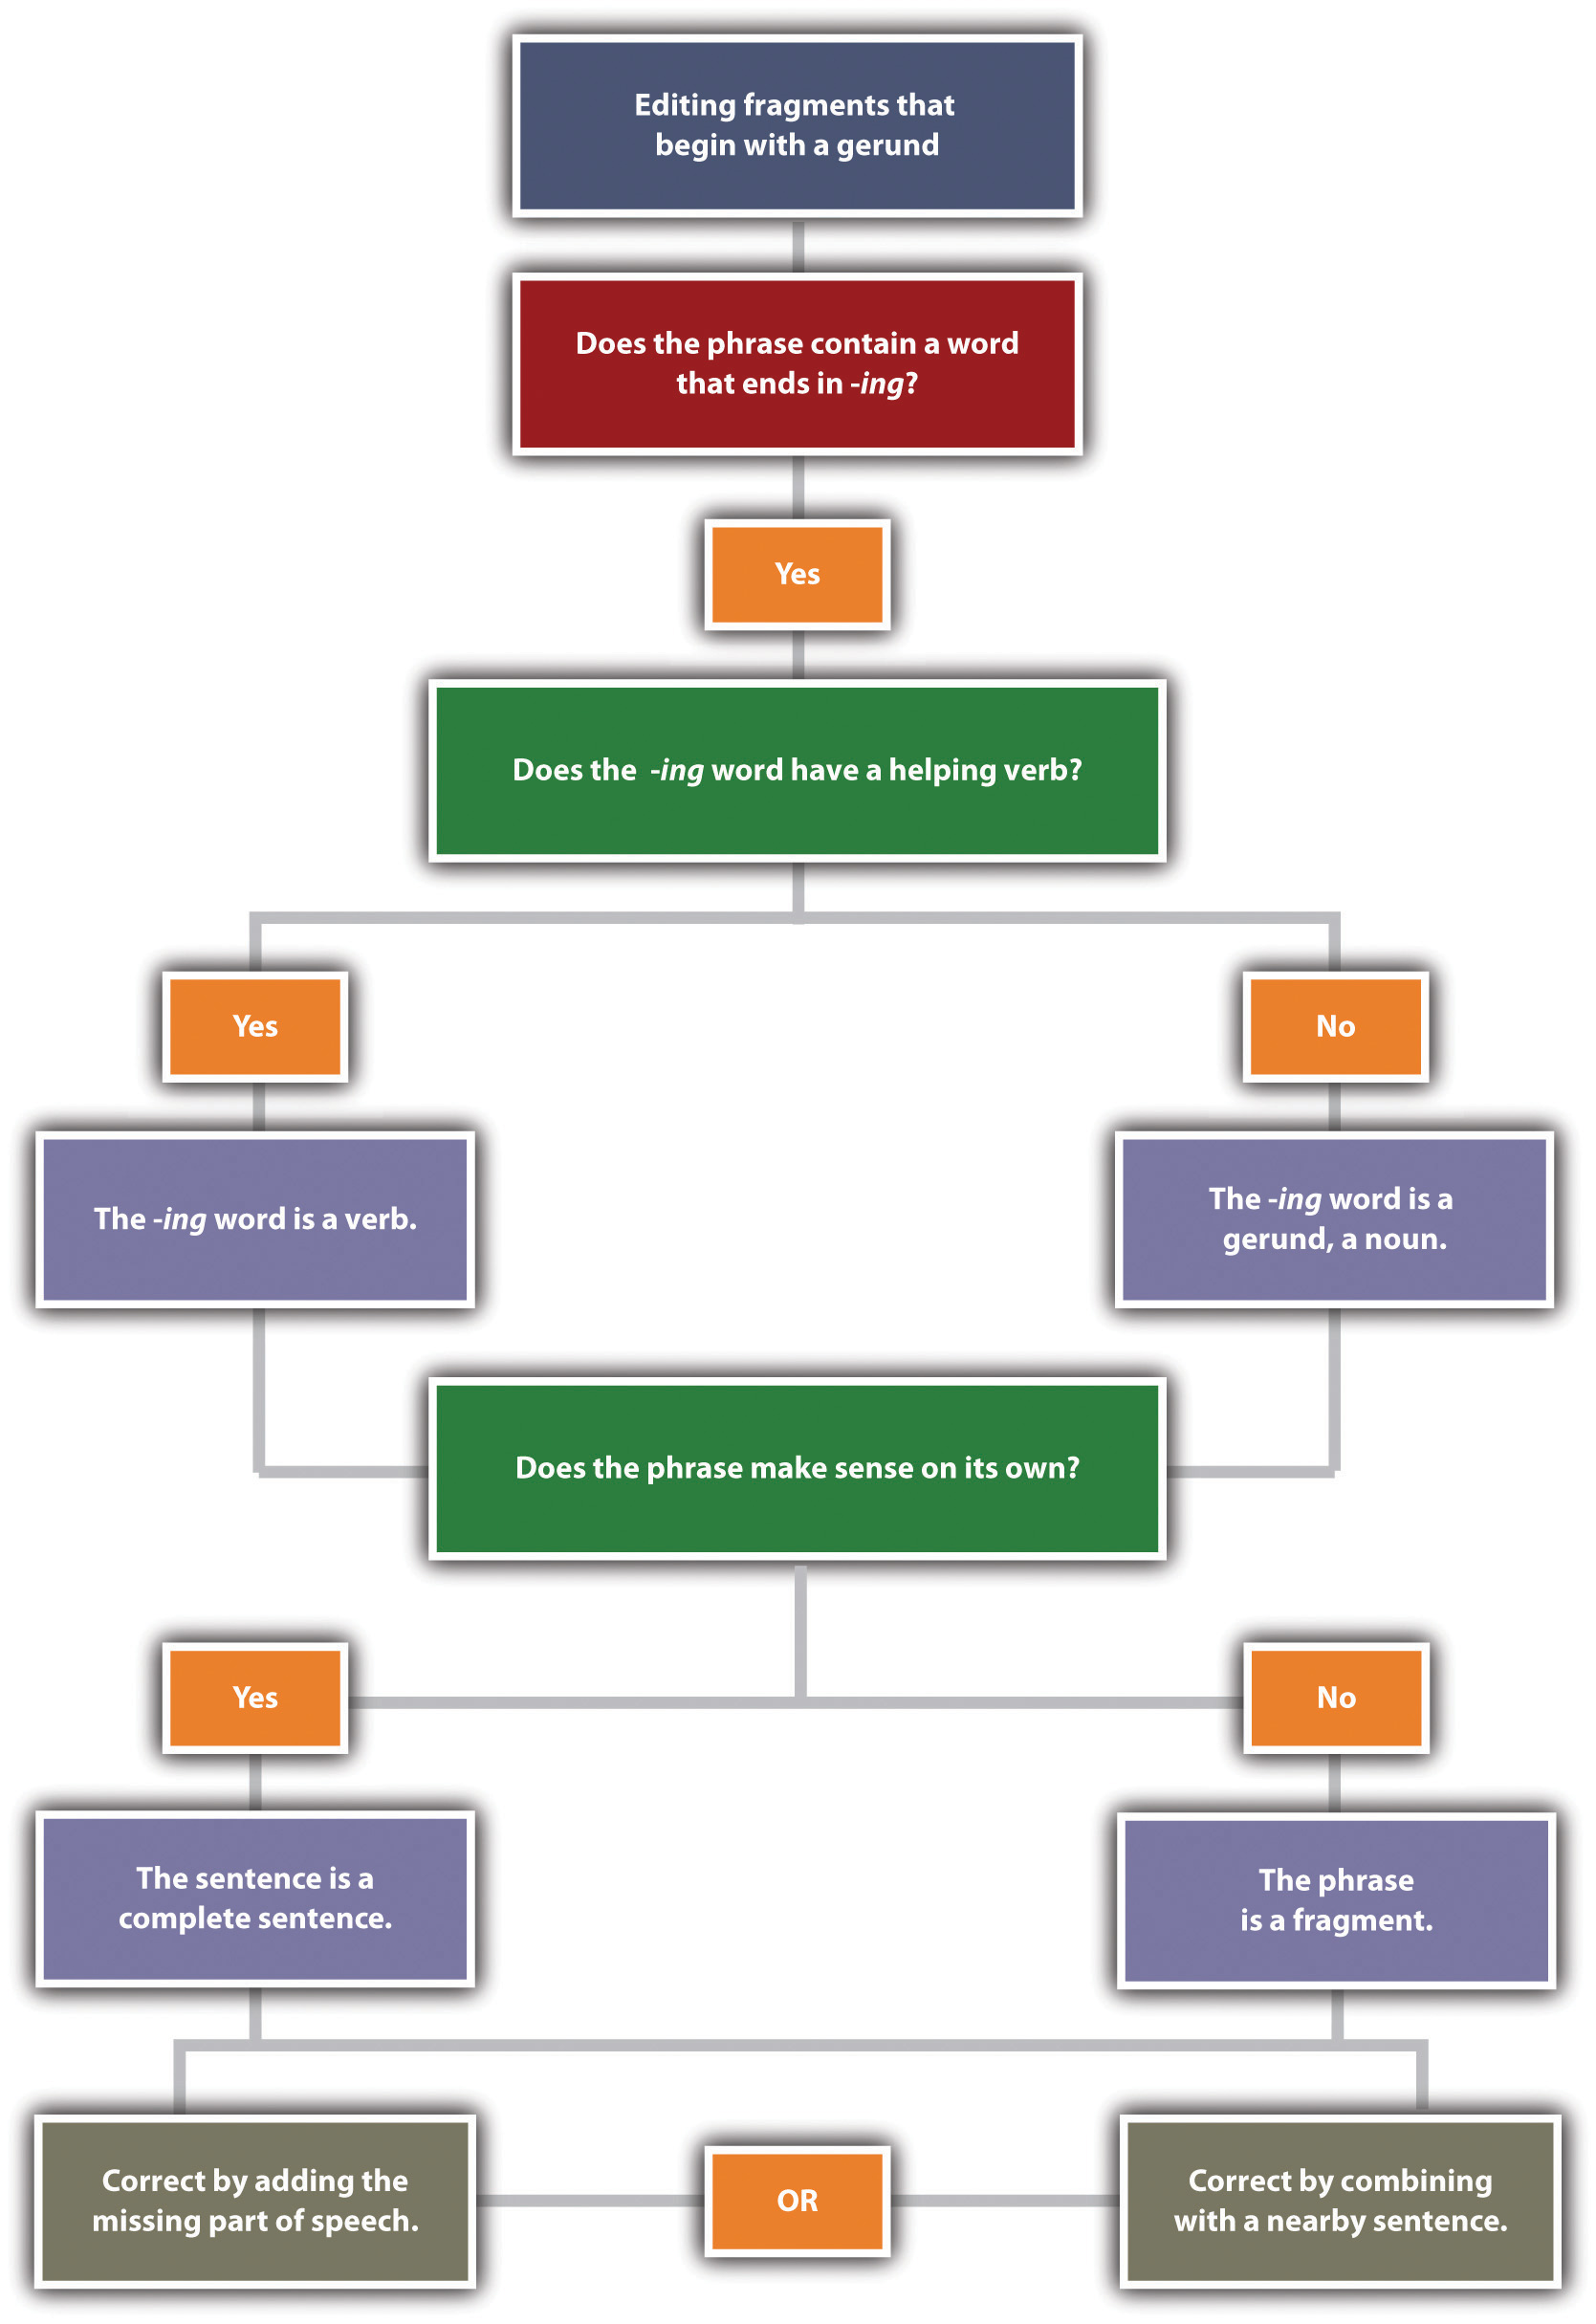 A decision tree for editing fragments that begin with gerunds. Image description available.